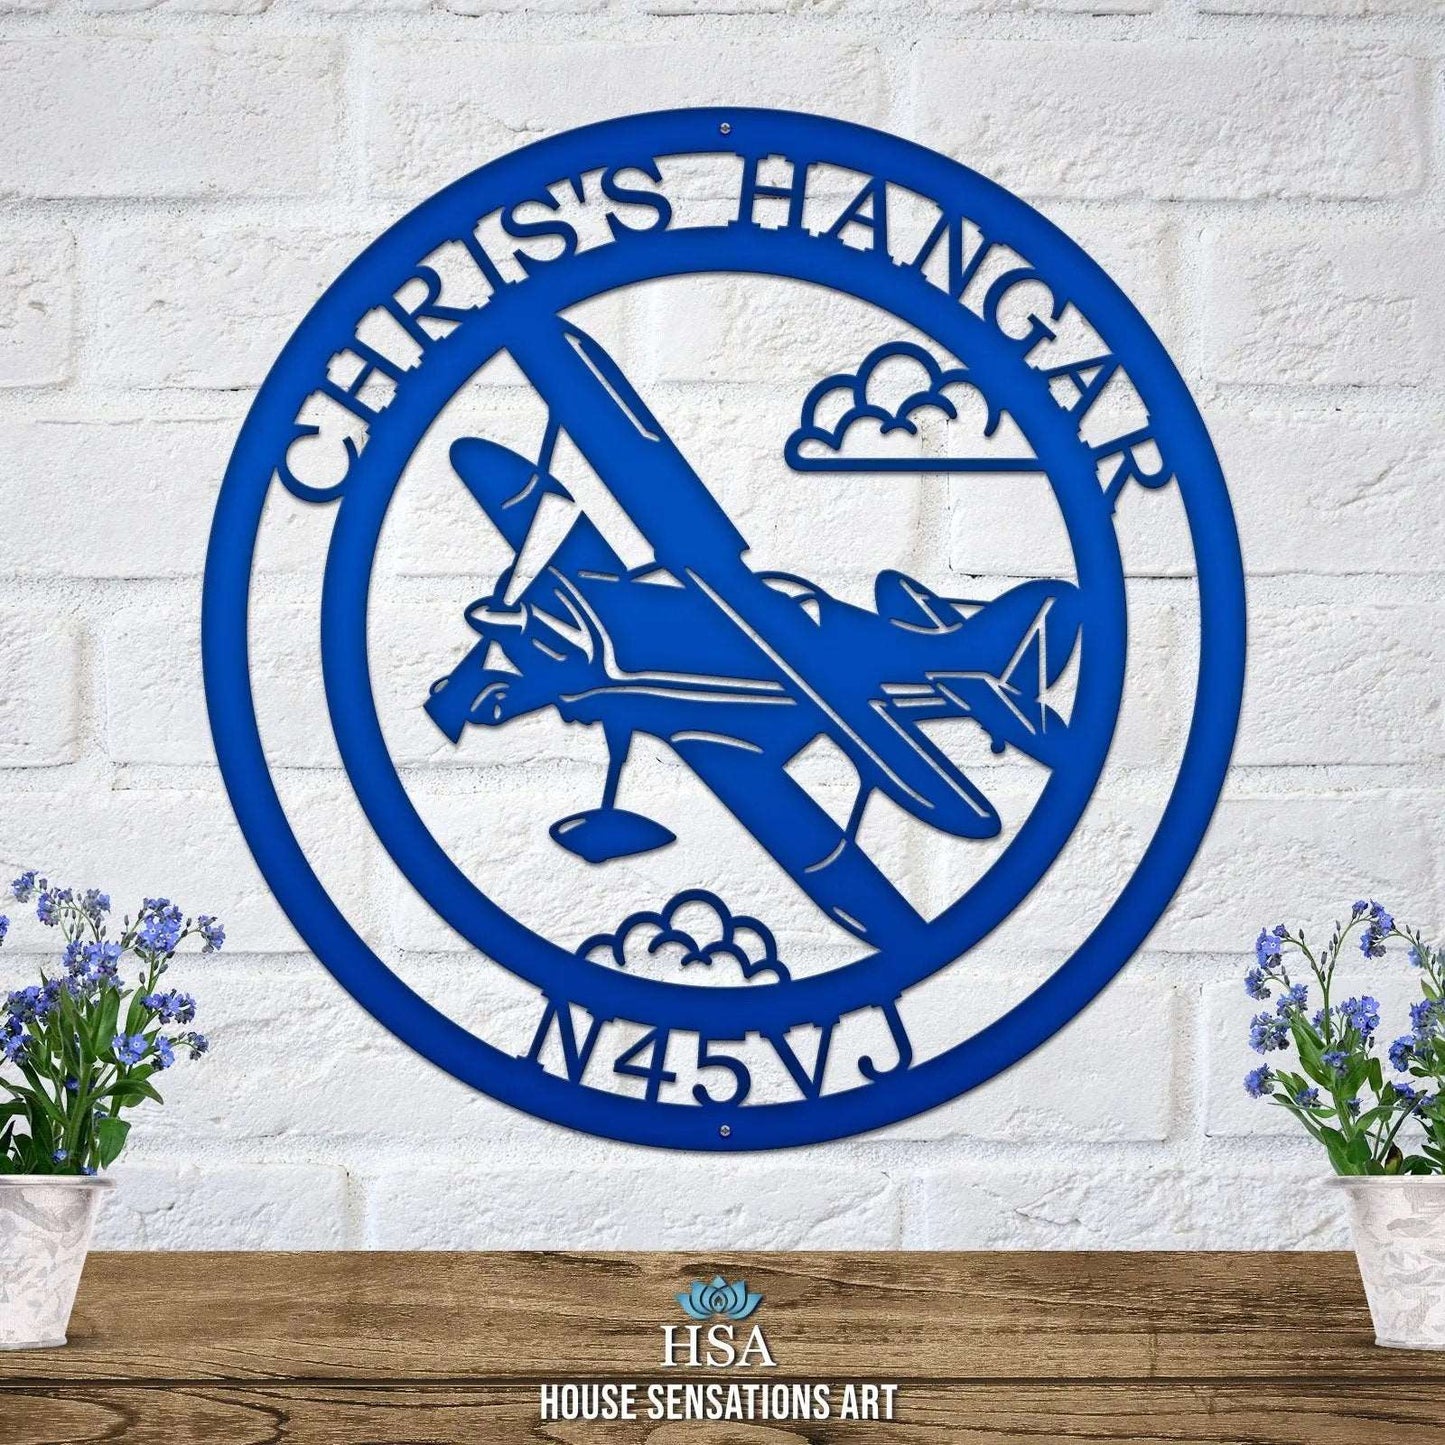 Personalized Airplane Sign | Gift for Pilot Car Sign House Sensations Art   